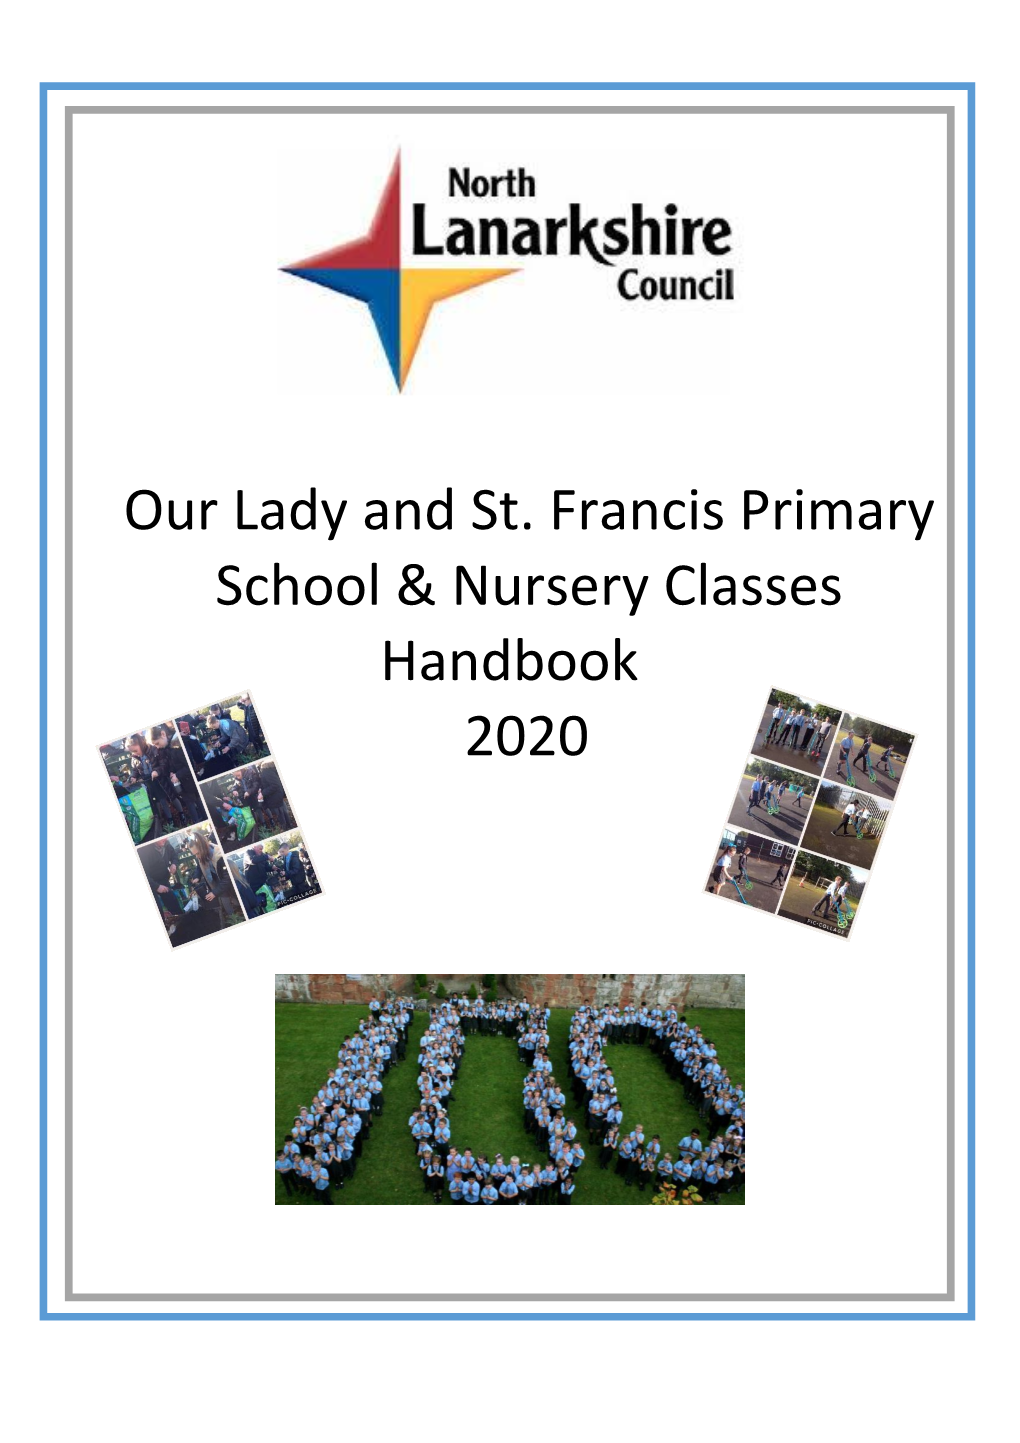 Our Lady and St. Francis Primary School & Nursery Classes